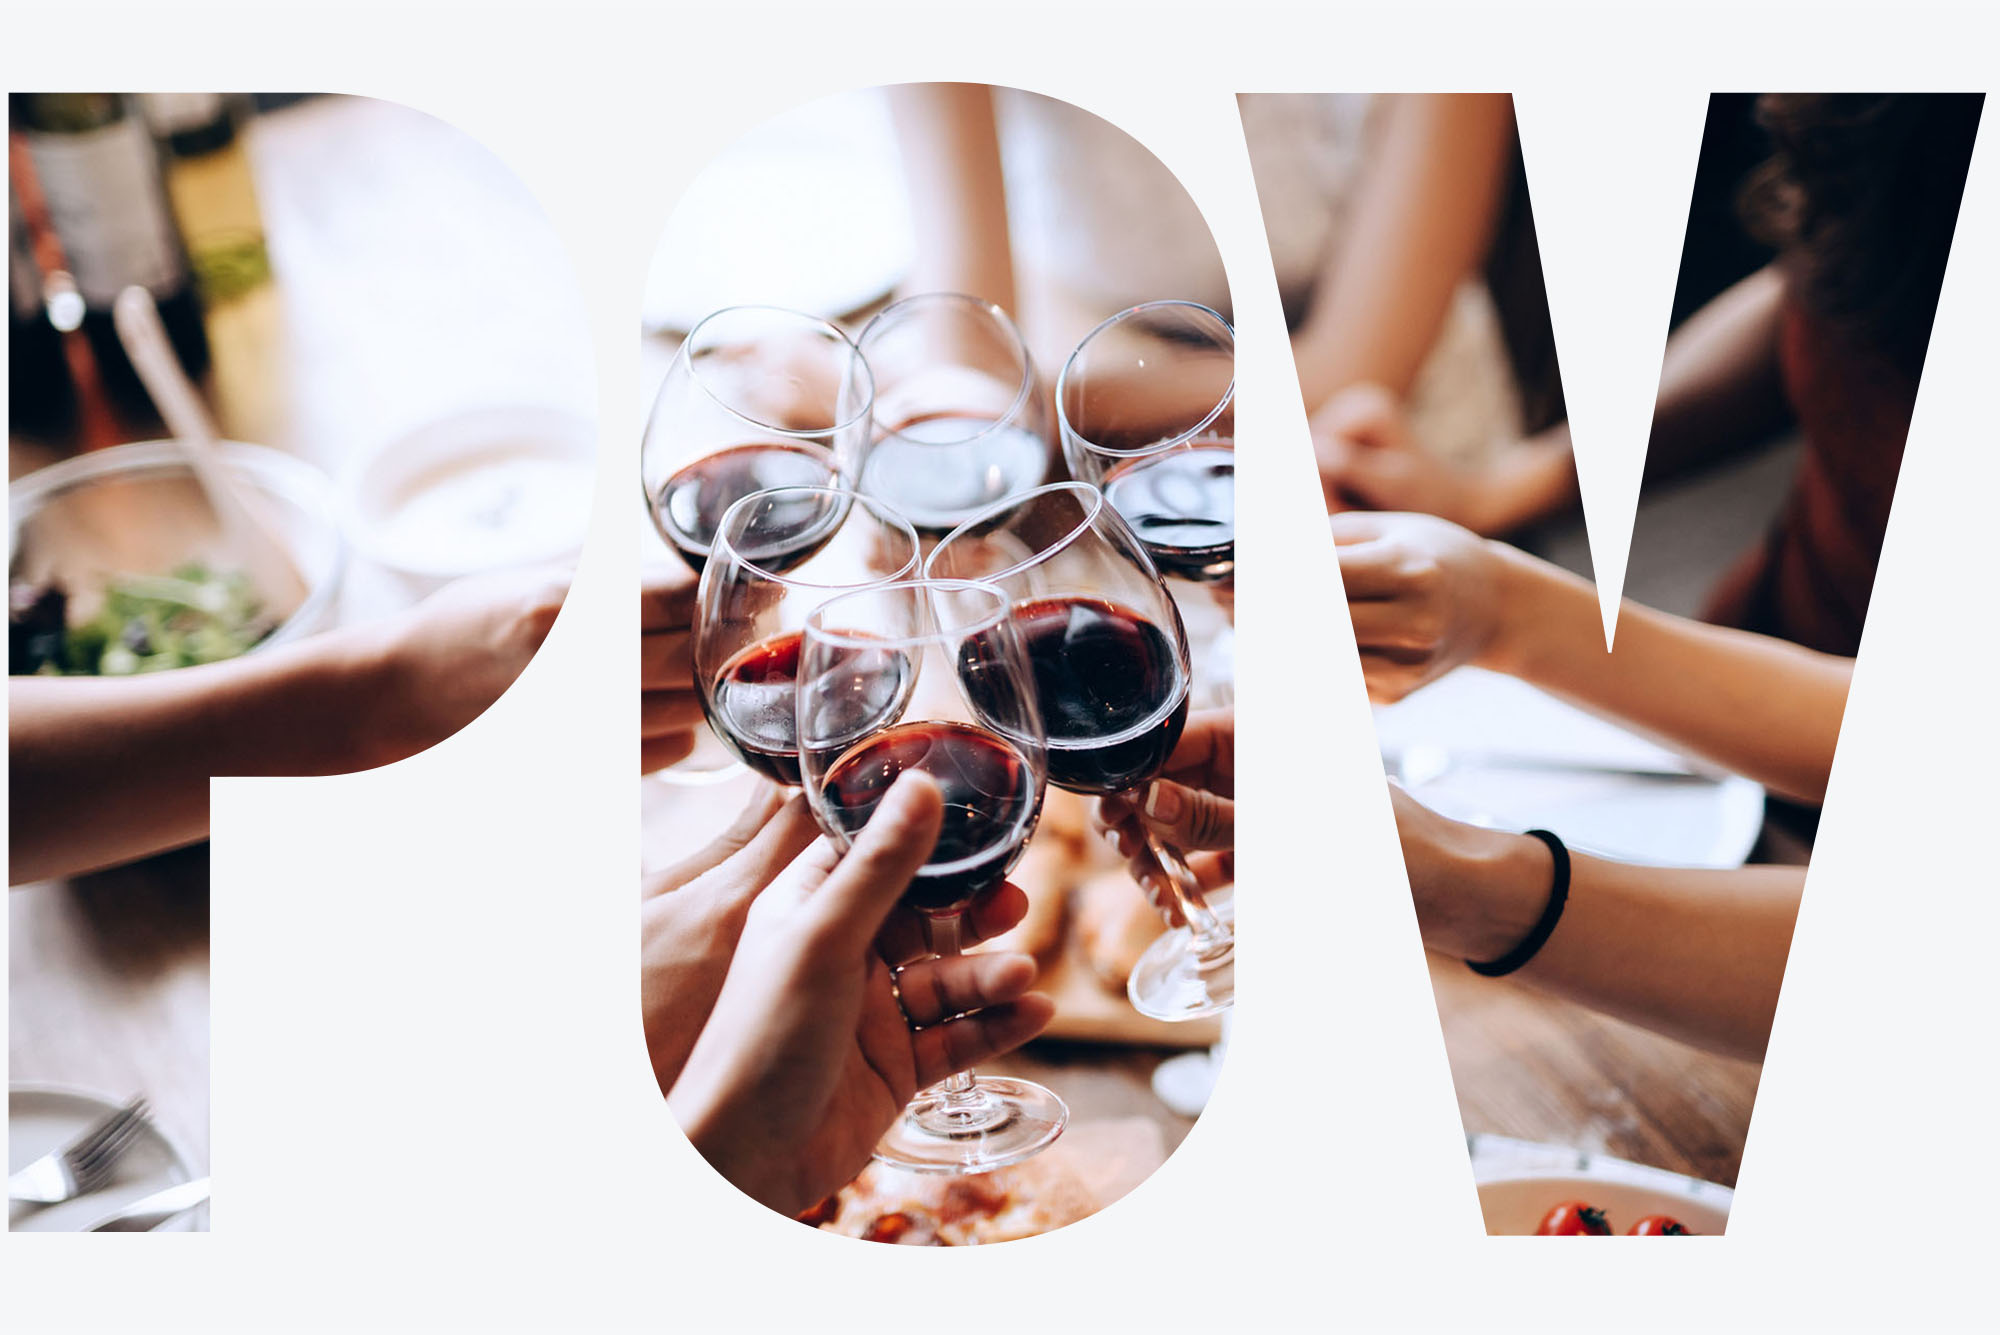 Photo: A group of people sitting at a table in a restaurant hold up their wine glasses for a toast. Text overlay reads "POV" in white